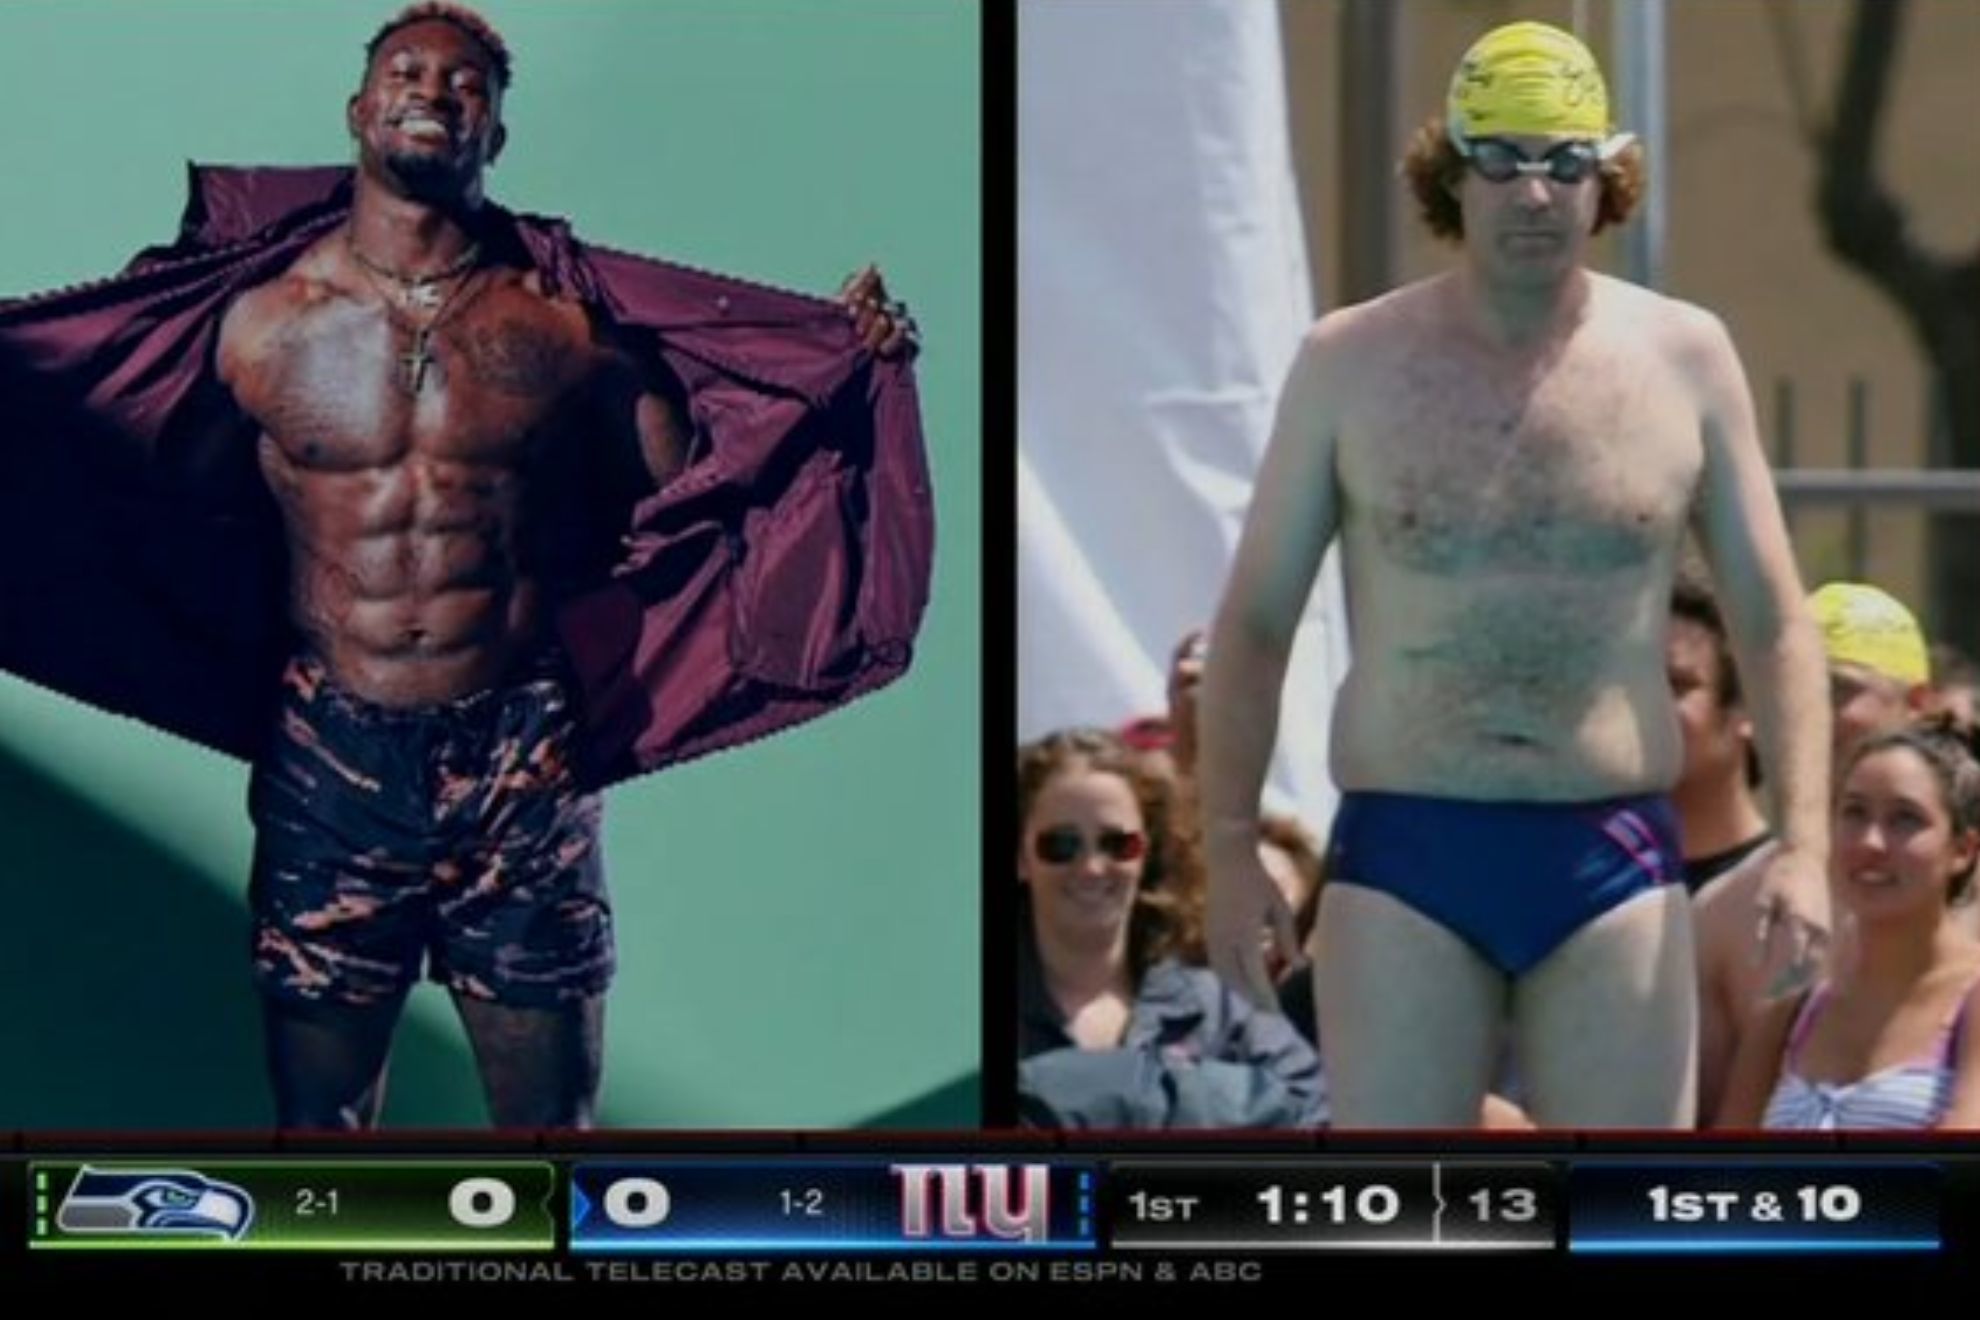 Will Ferrell perfectly predicts DK Metcalf TD as Manning brothers troll him